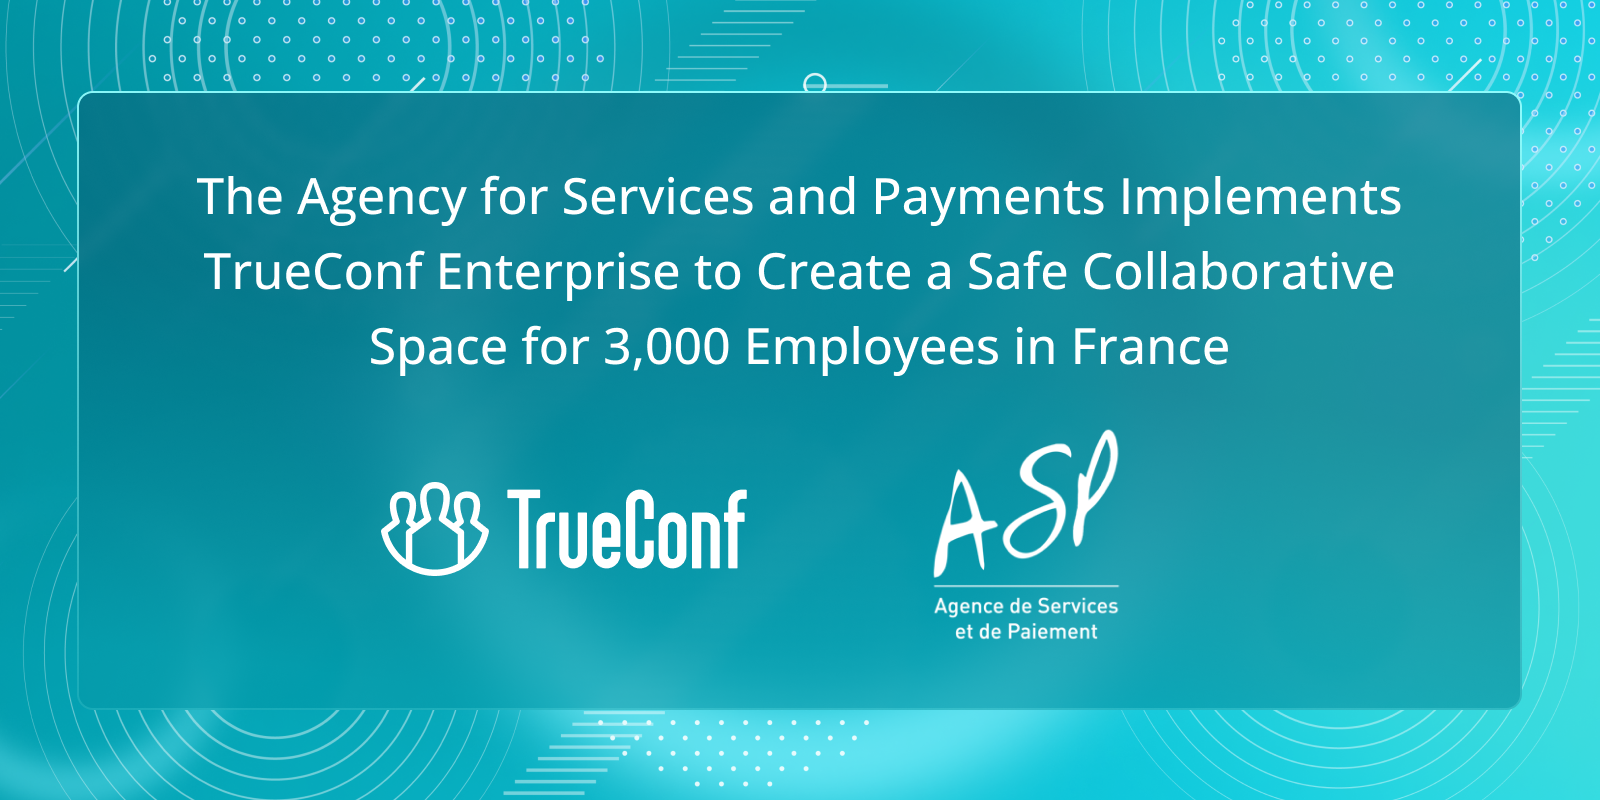 The Agency for Services and Payments Implements TrueConf Enterprise to Create a Safe Collaborative Space for 3,000 Employees in France 1